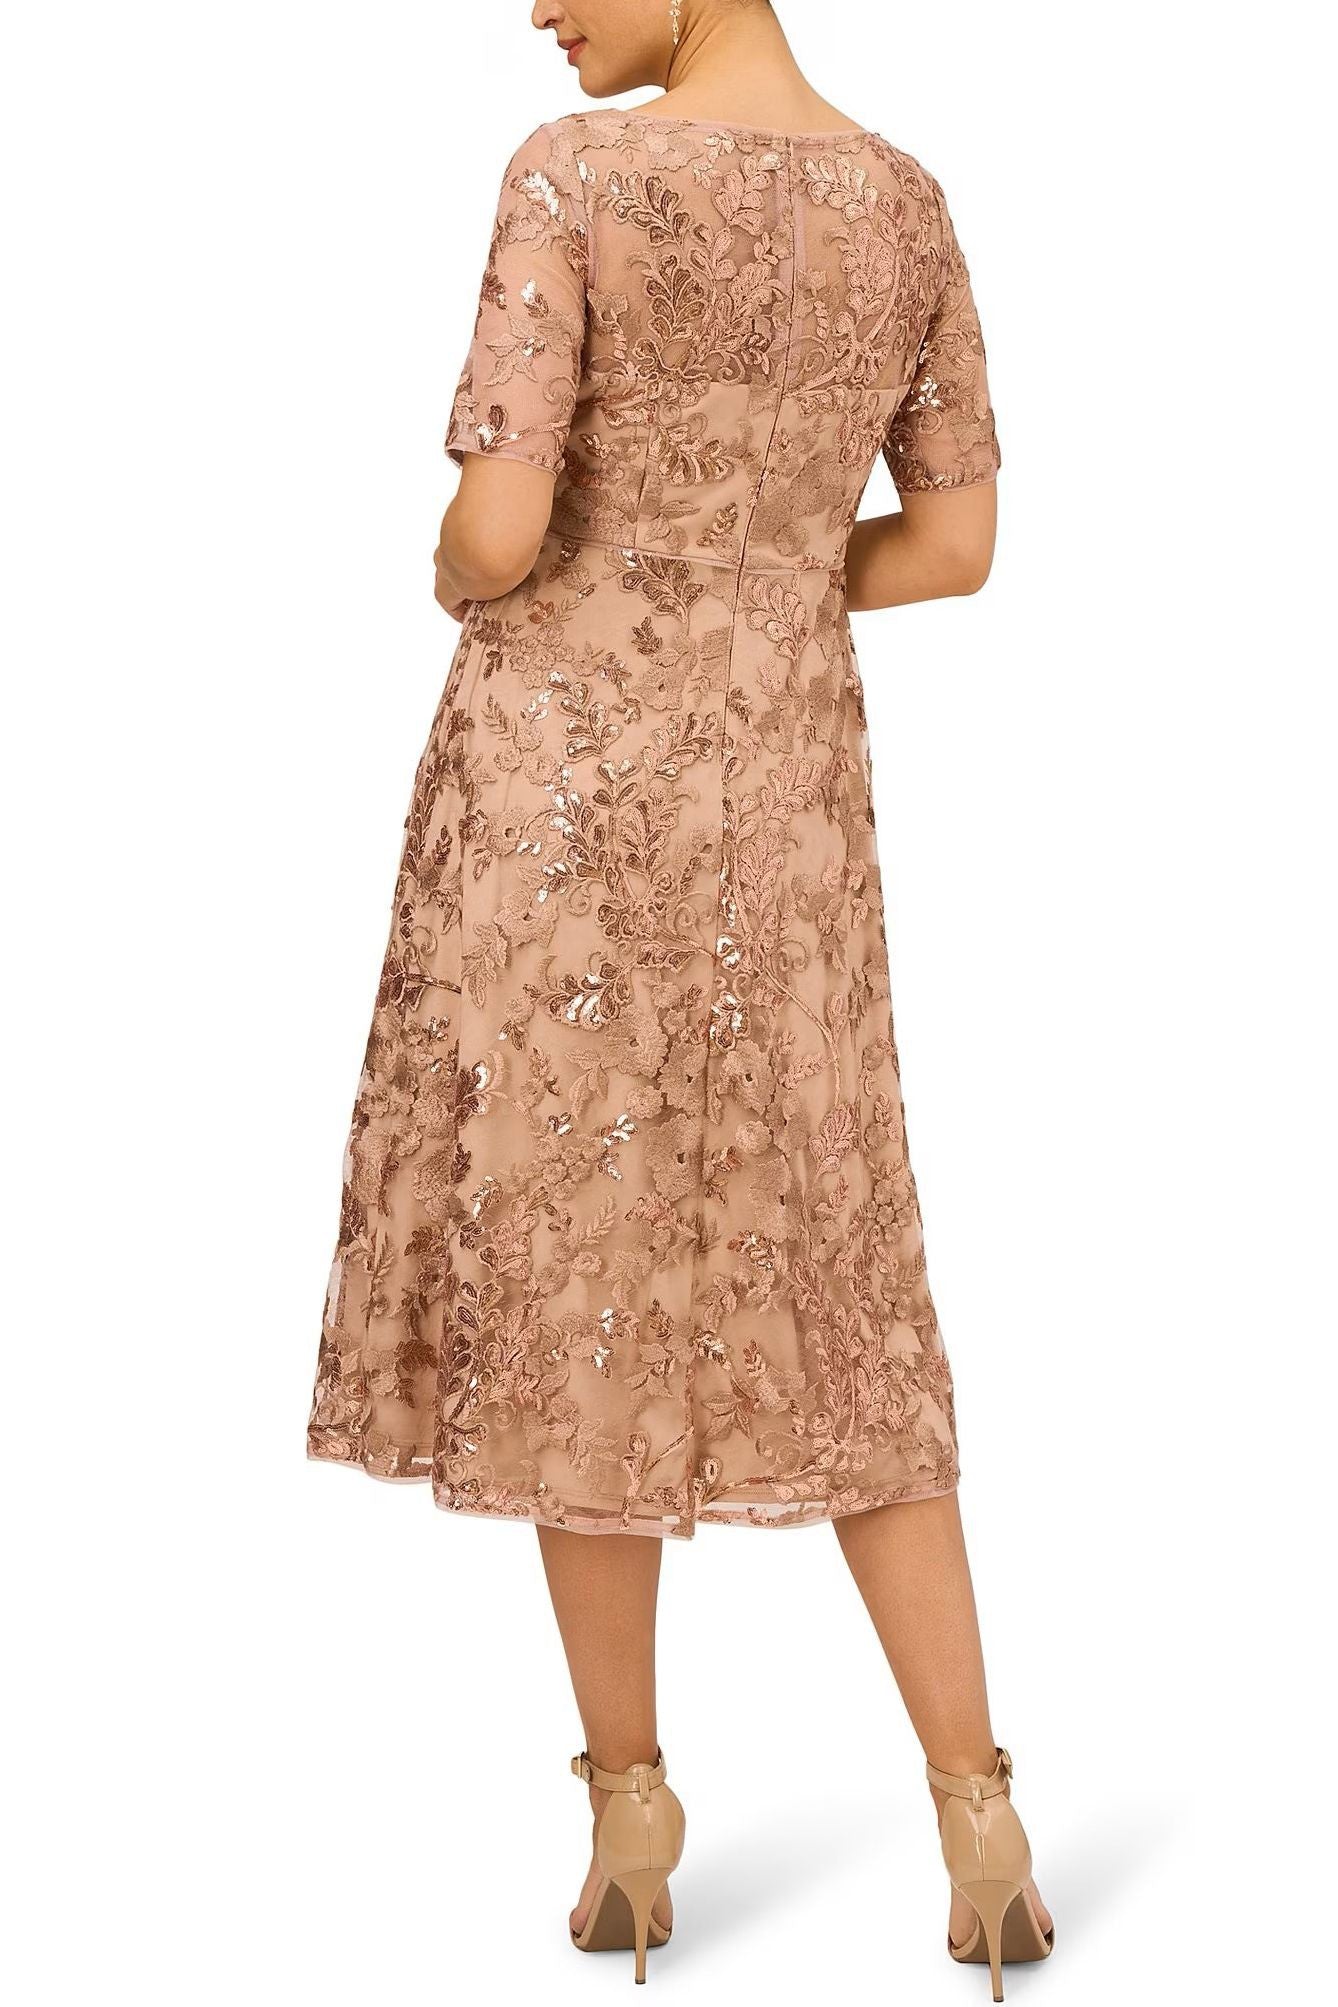 Adrianna Papell Embroidered Mesh Dress